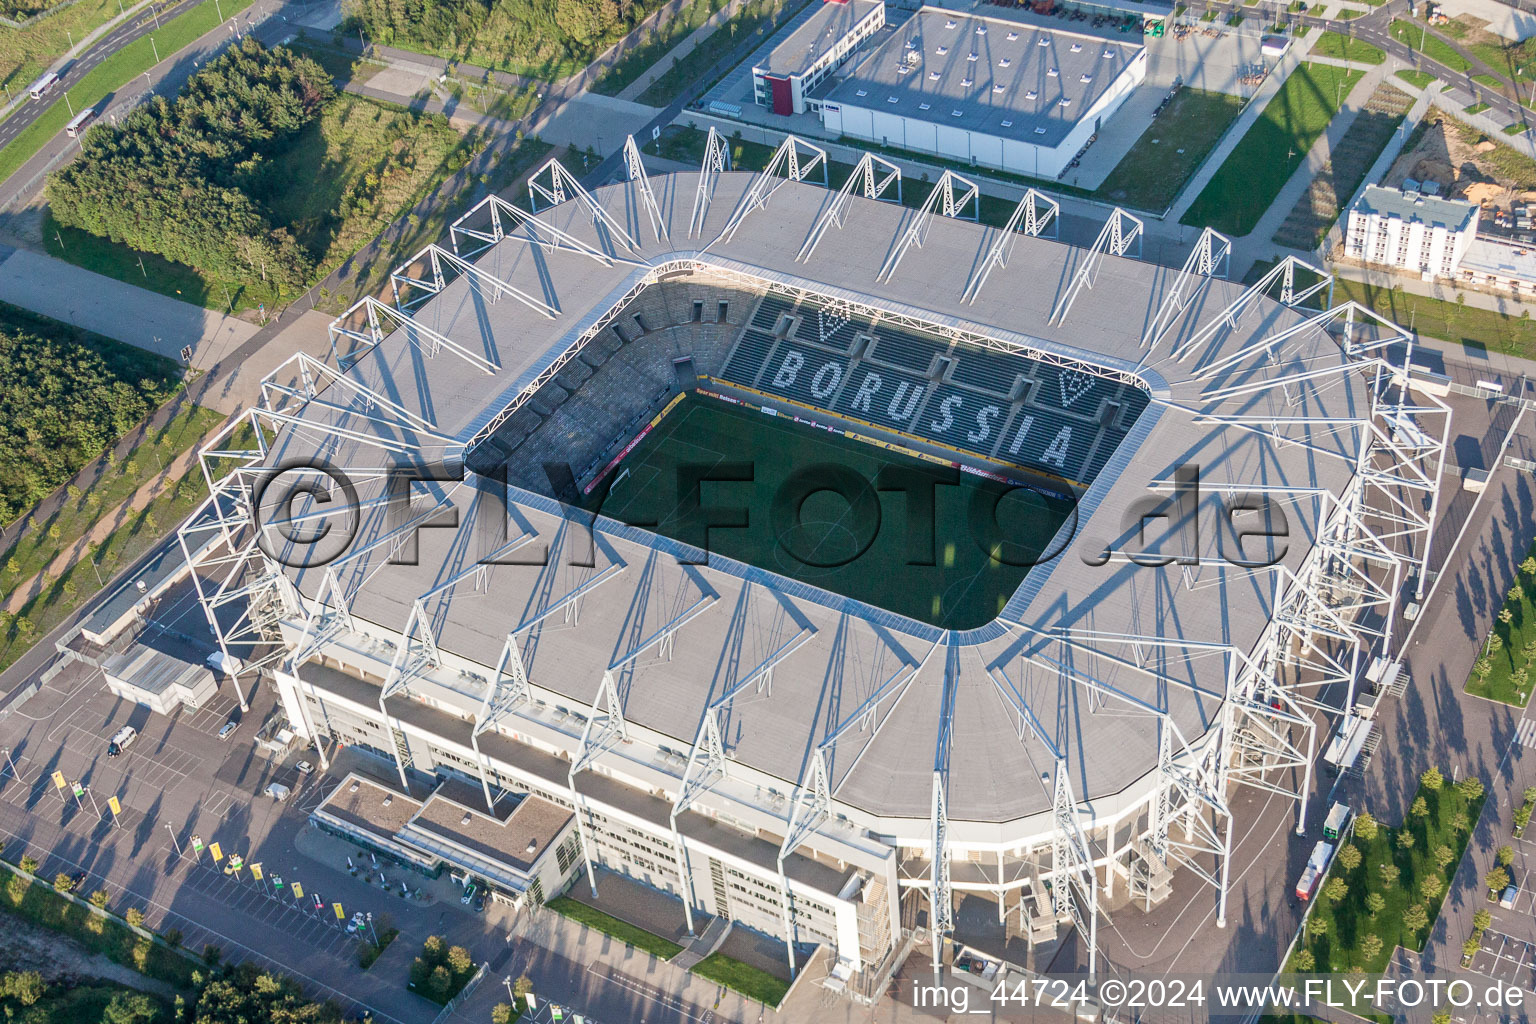 Aerial view of Sports facility grounds of the Arena stadium BORUSSIA-PARK in Moenchengladbach in the state North Rhine-Westphalia, Germany